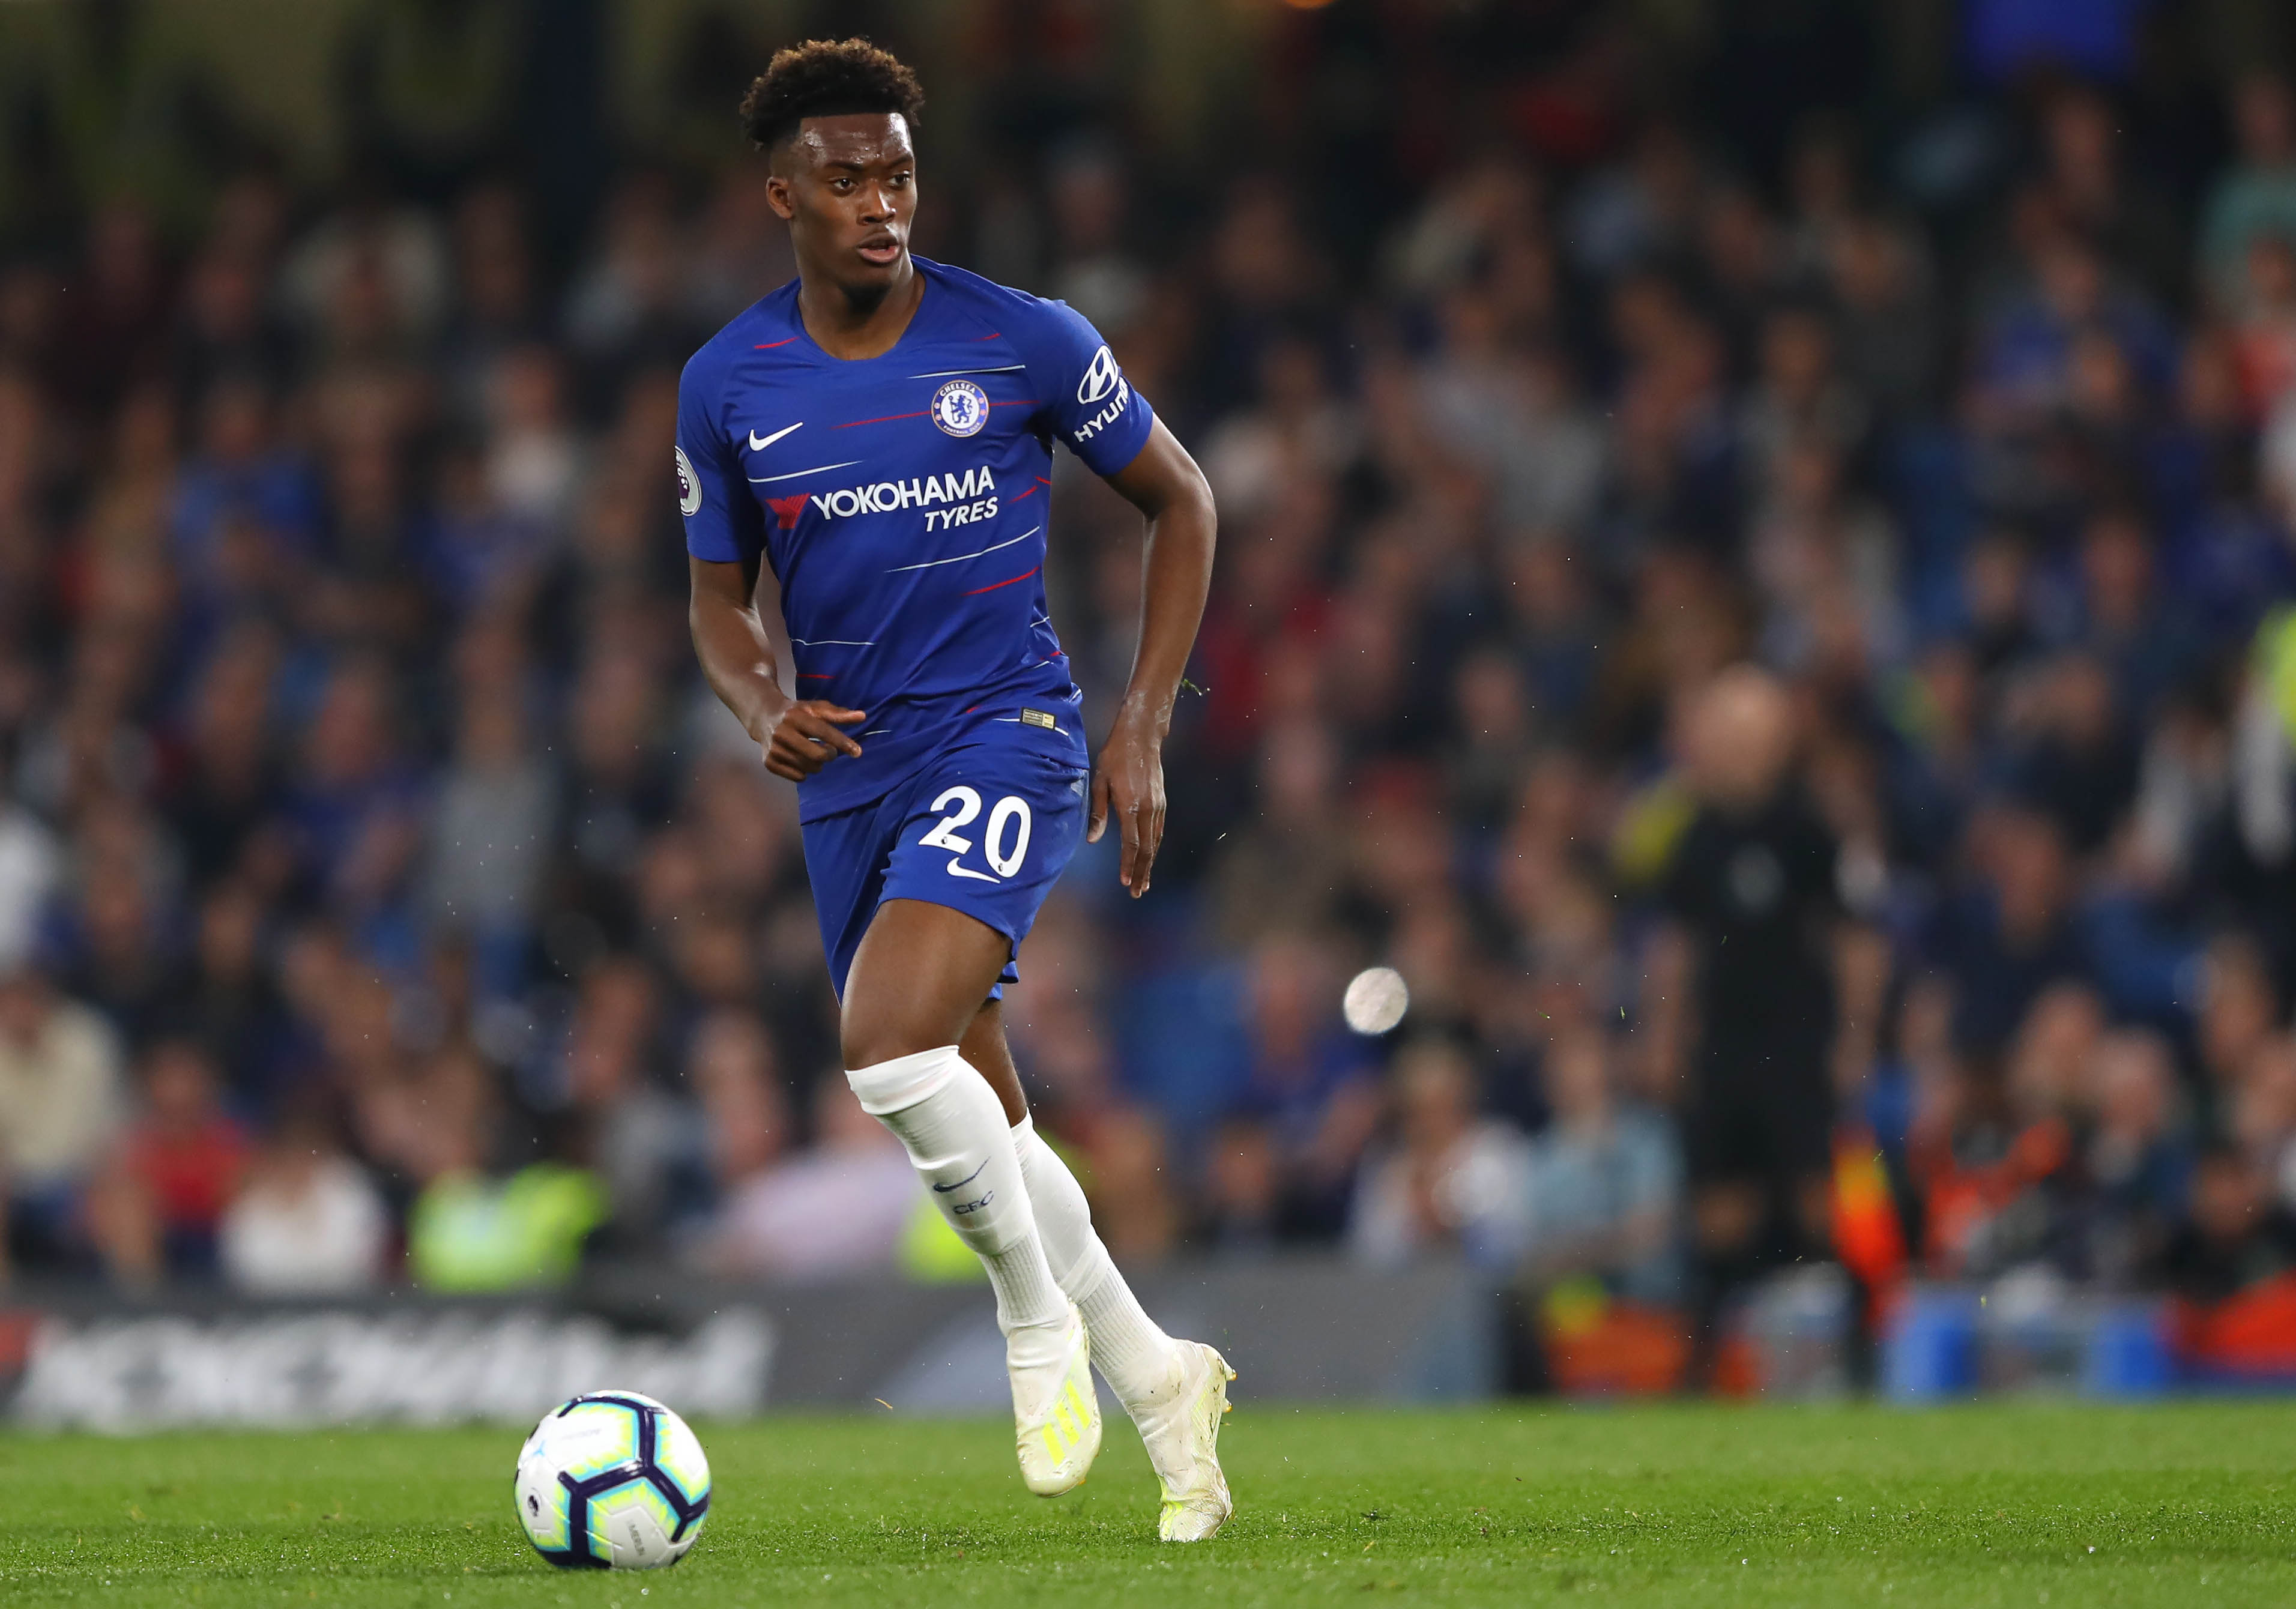 Callum Hudson-Odoi looks set to stay put at Chelsea. (Photo courtesy: AFP/Getty)